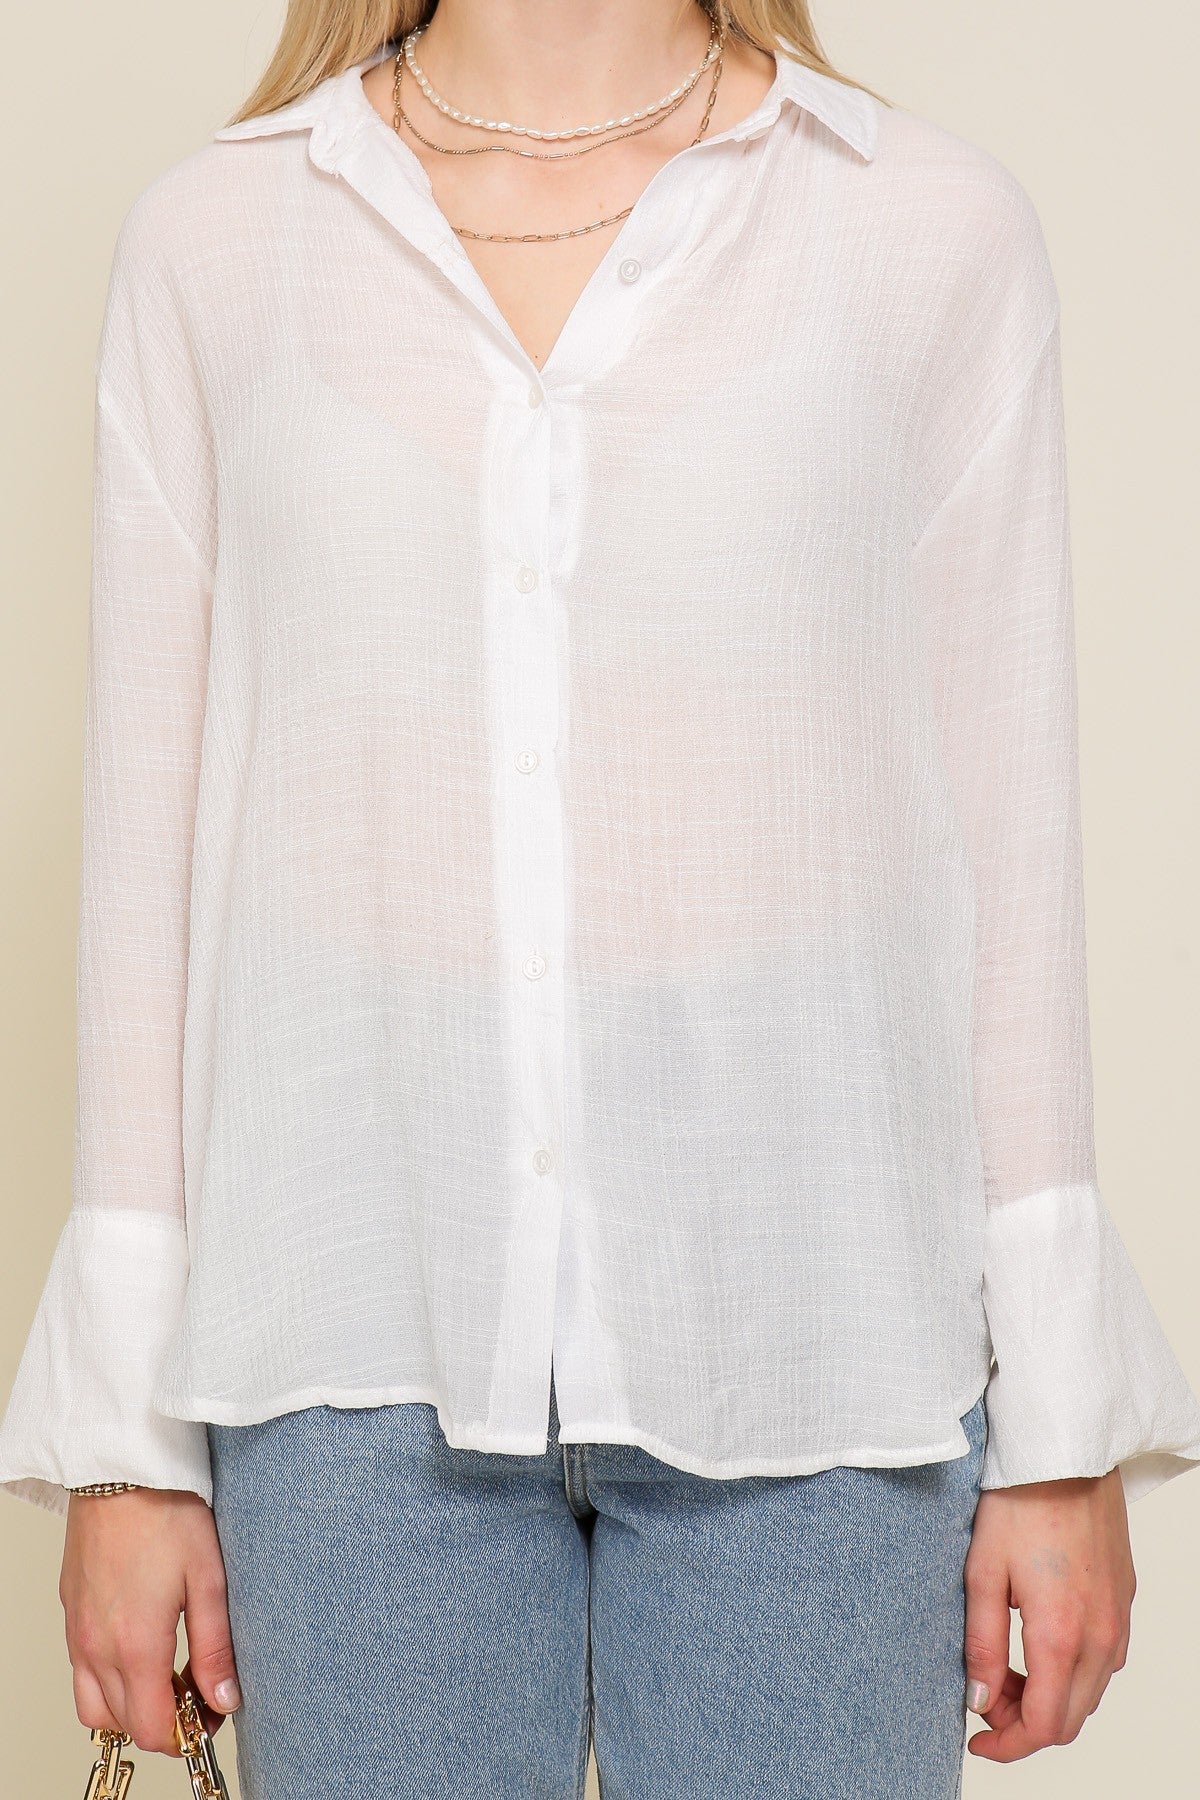 Simple Collared Shirt